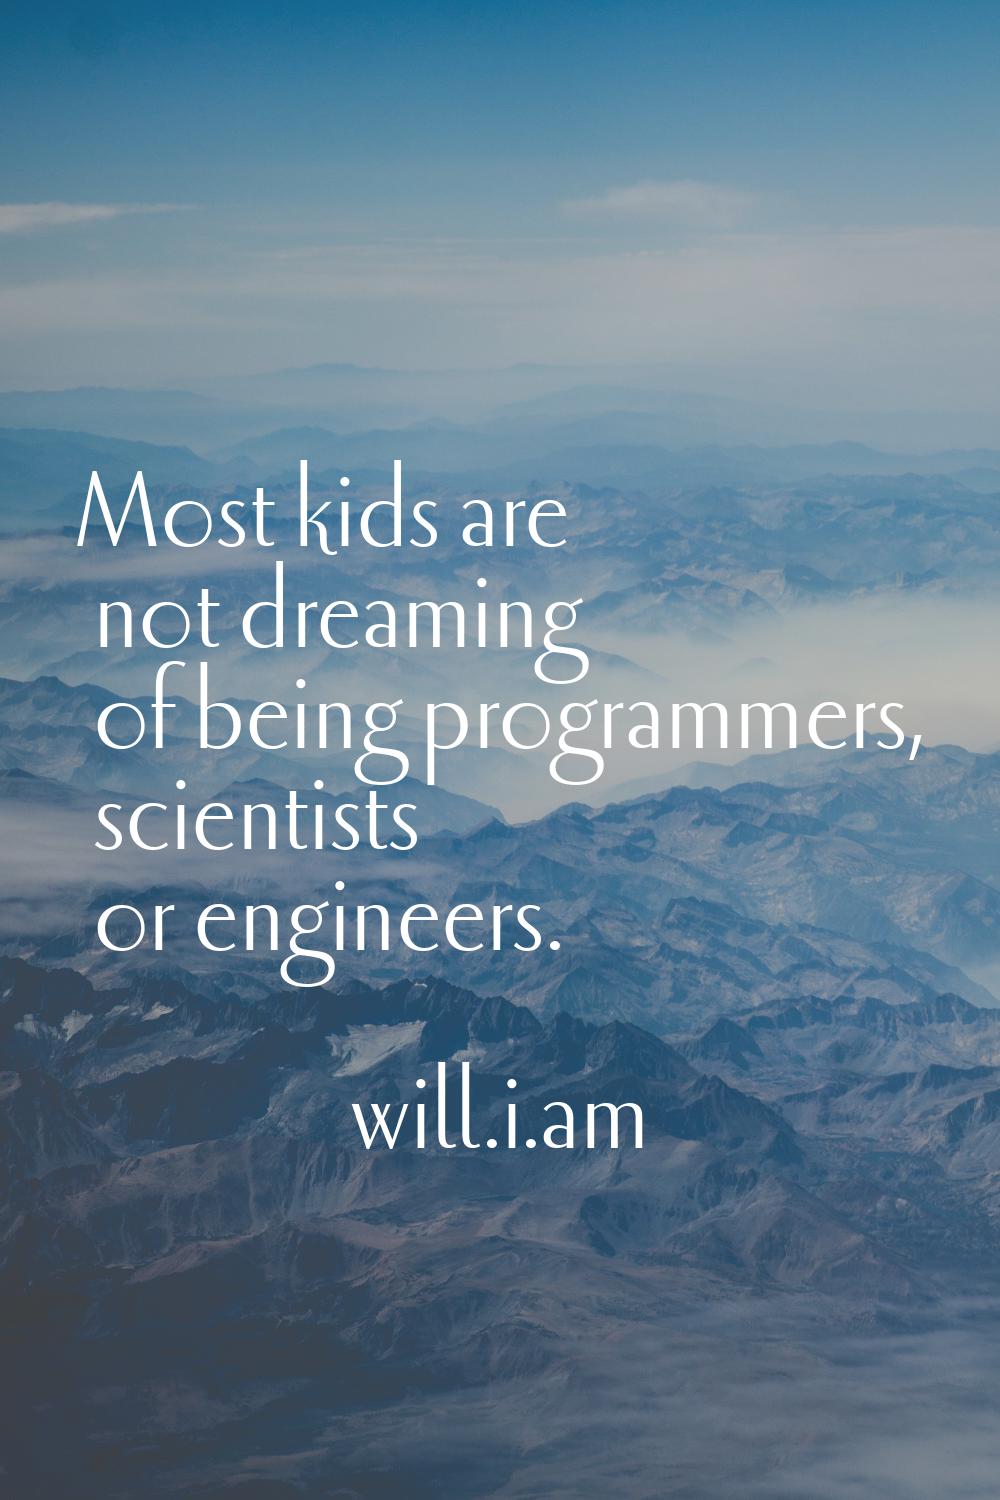 Most kids are not dreaming of being programmers, scientists or engineers.